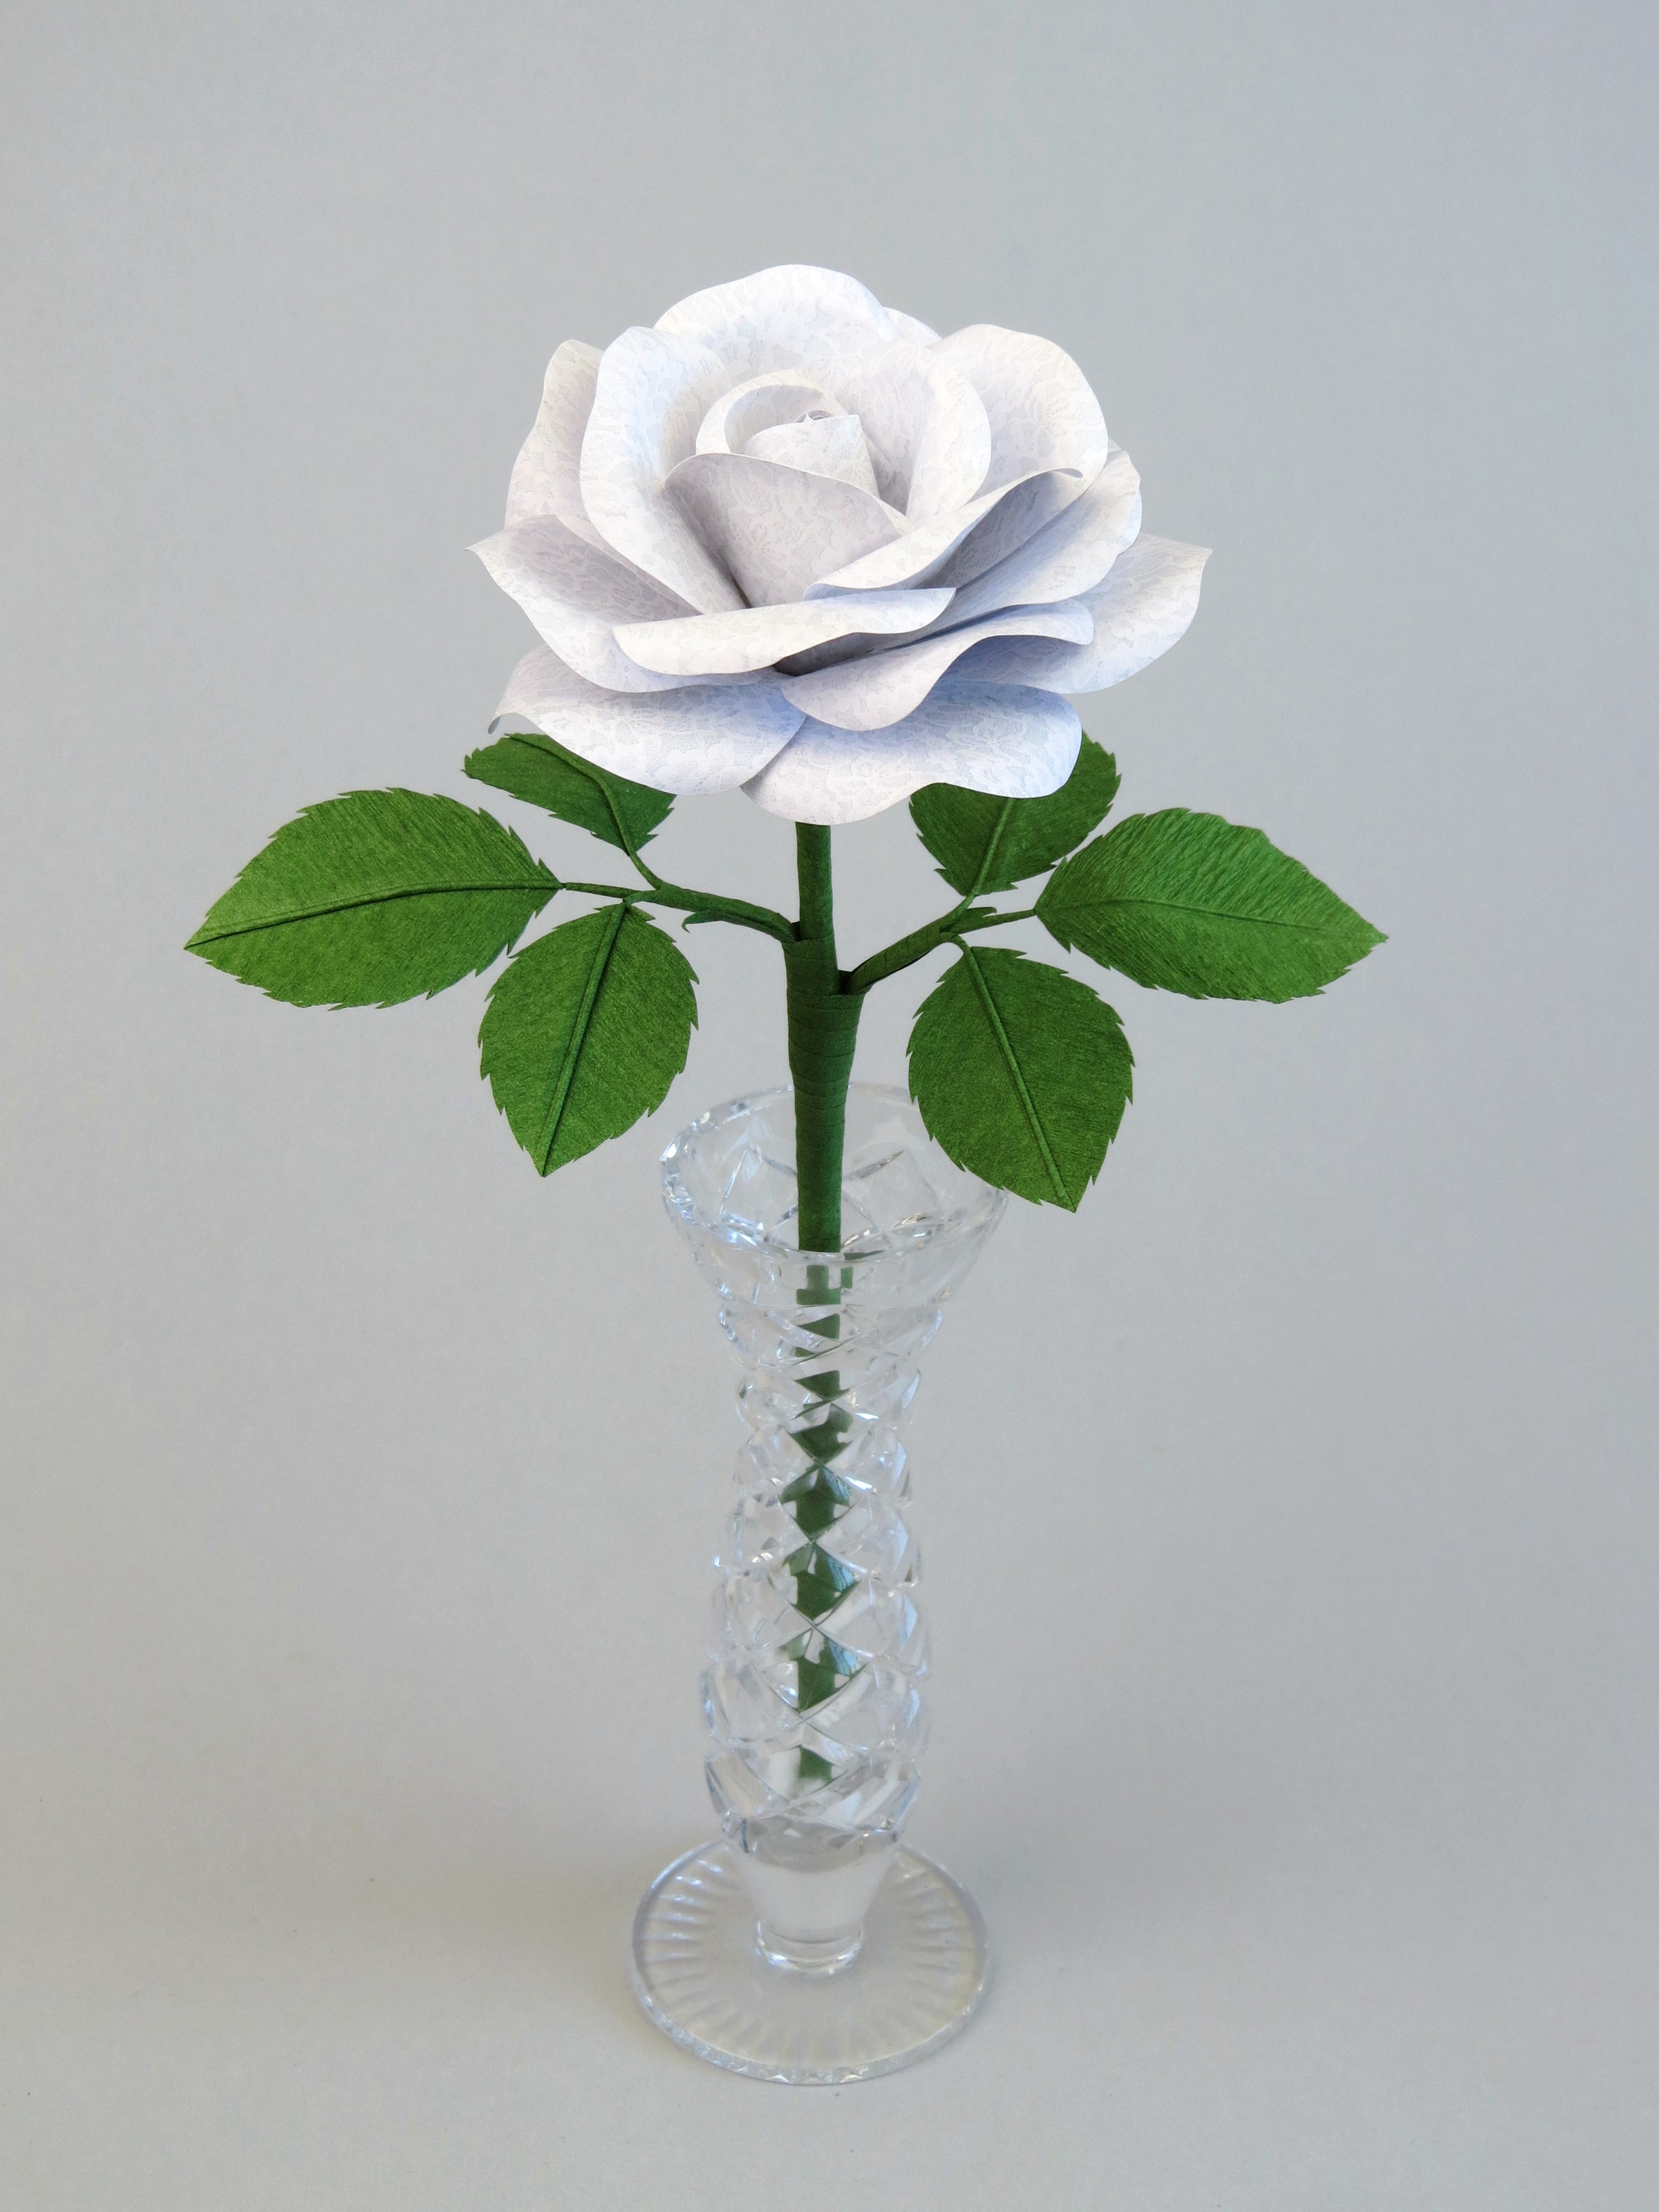 White lace printed paper rose with six ivy green leaves standing in a narrow glass vase set against a light grey background